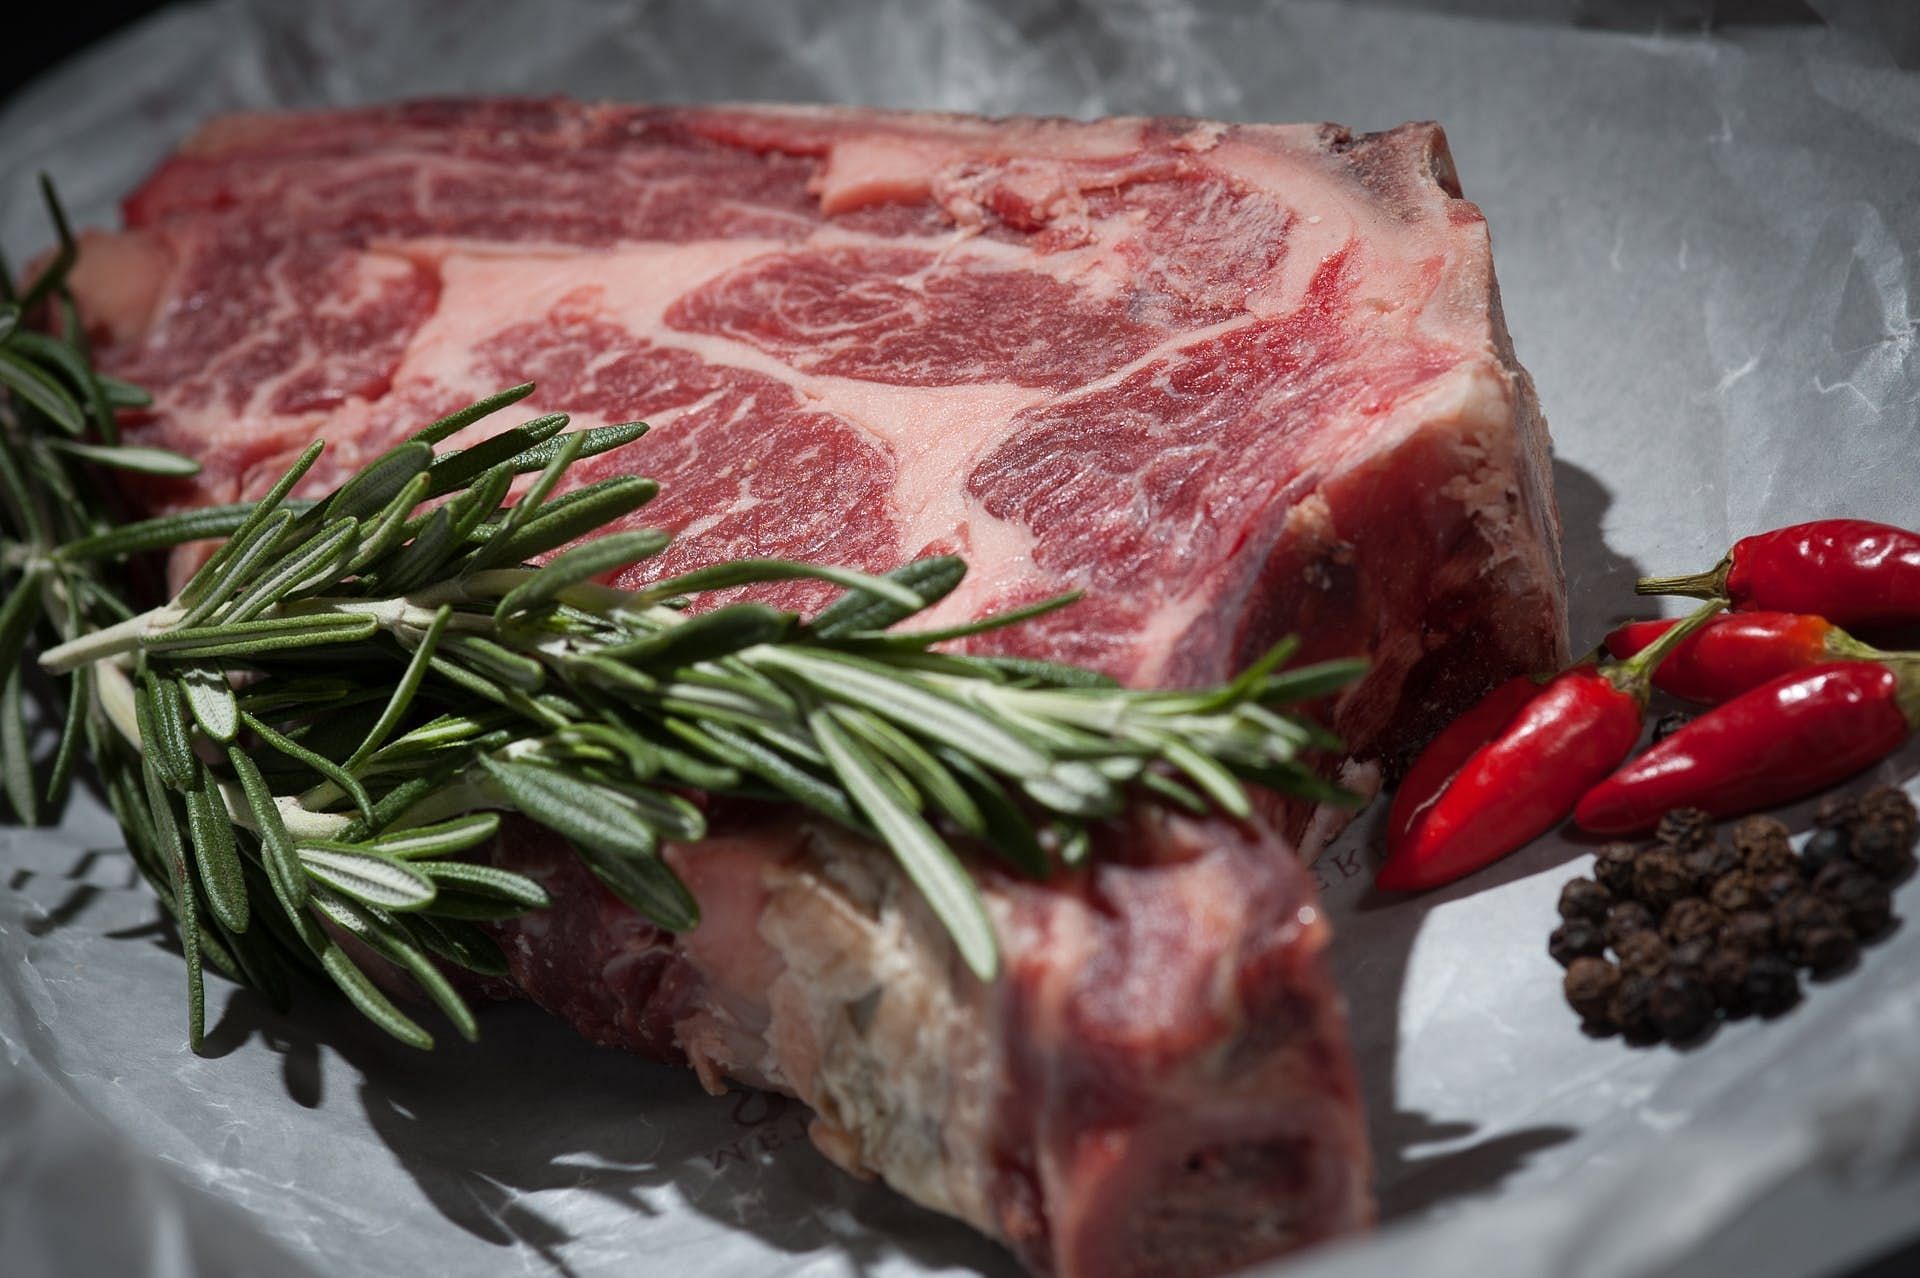 Benefits Of Raw Meat Consumption (Image via Pexels/mali maeder)